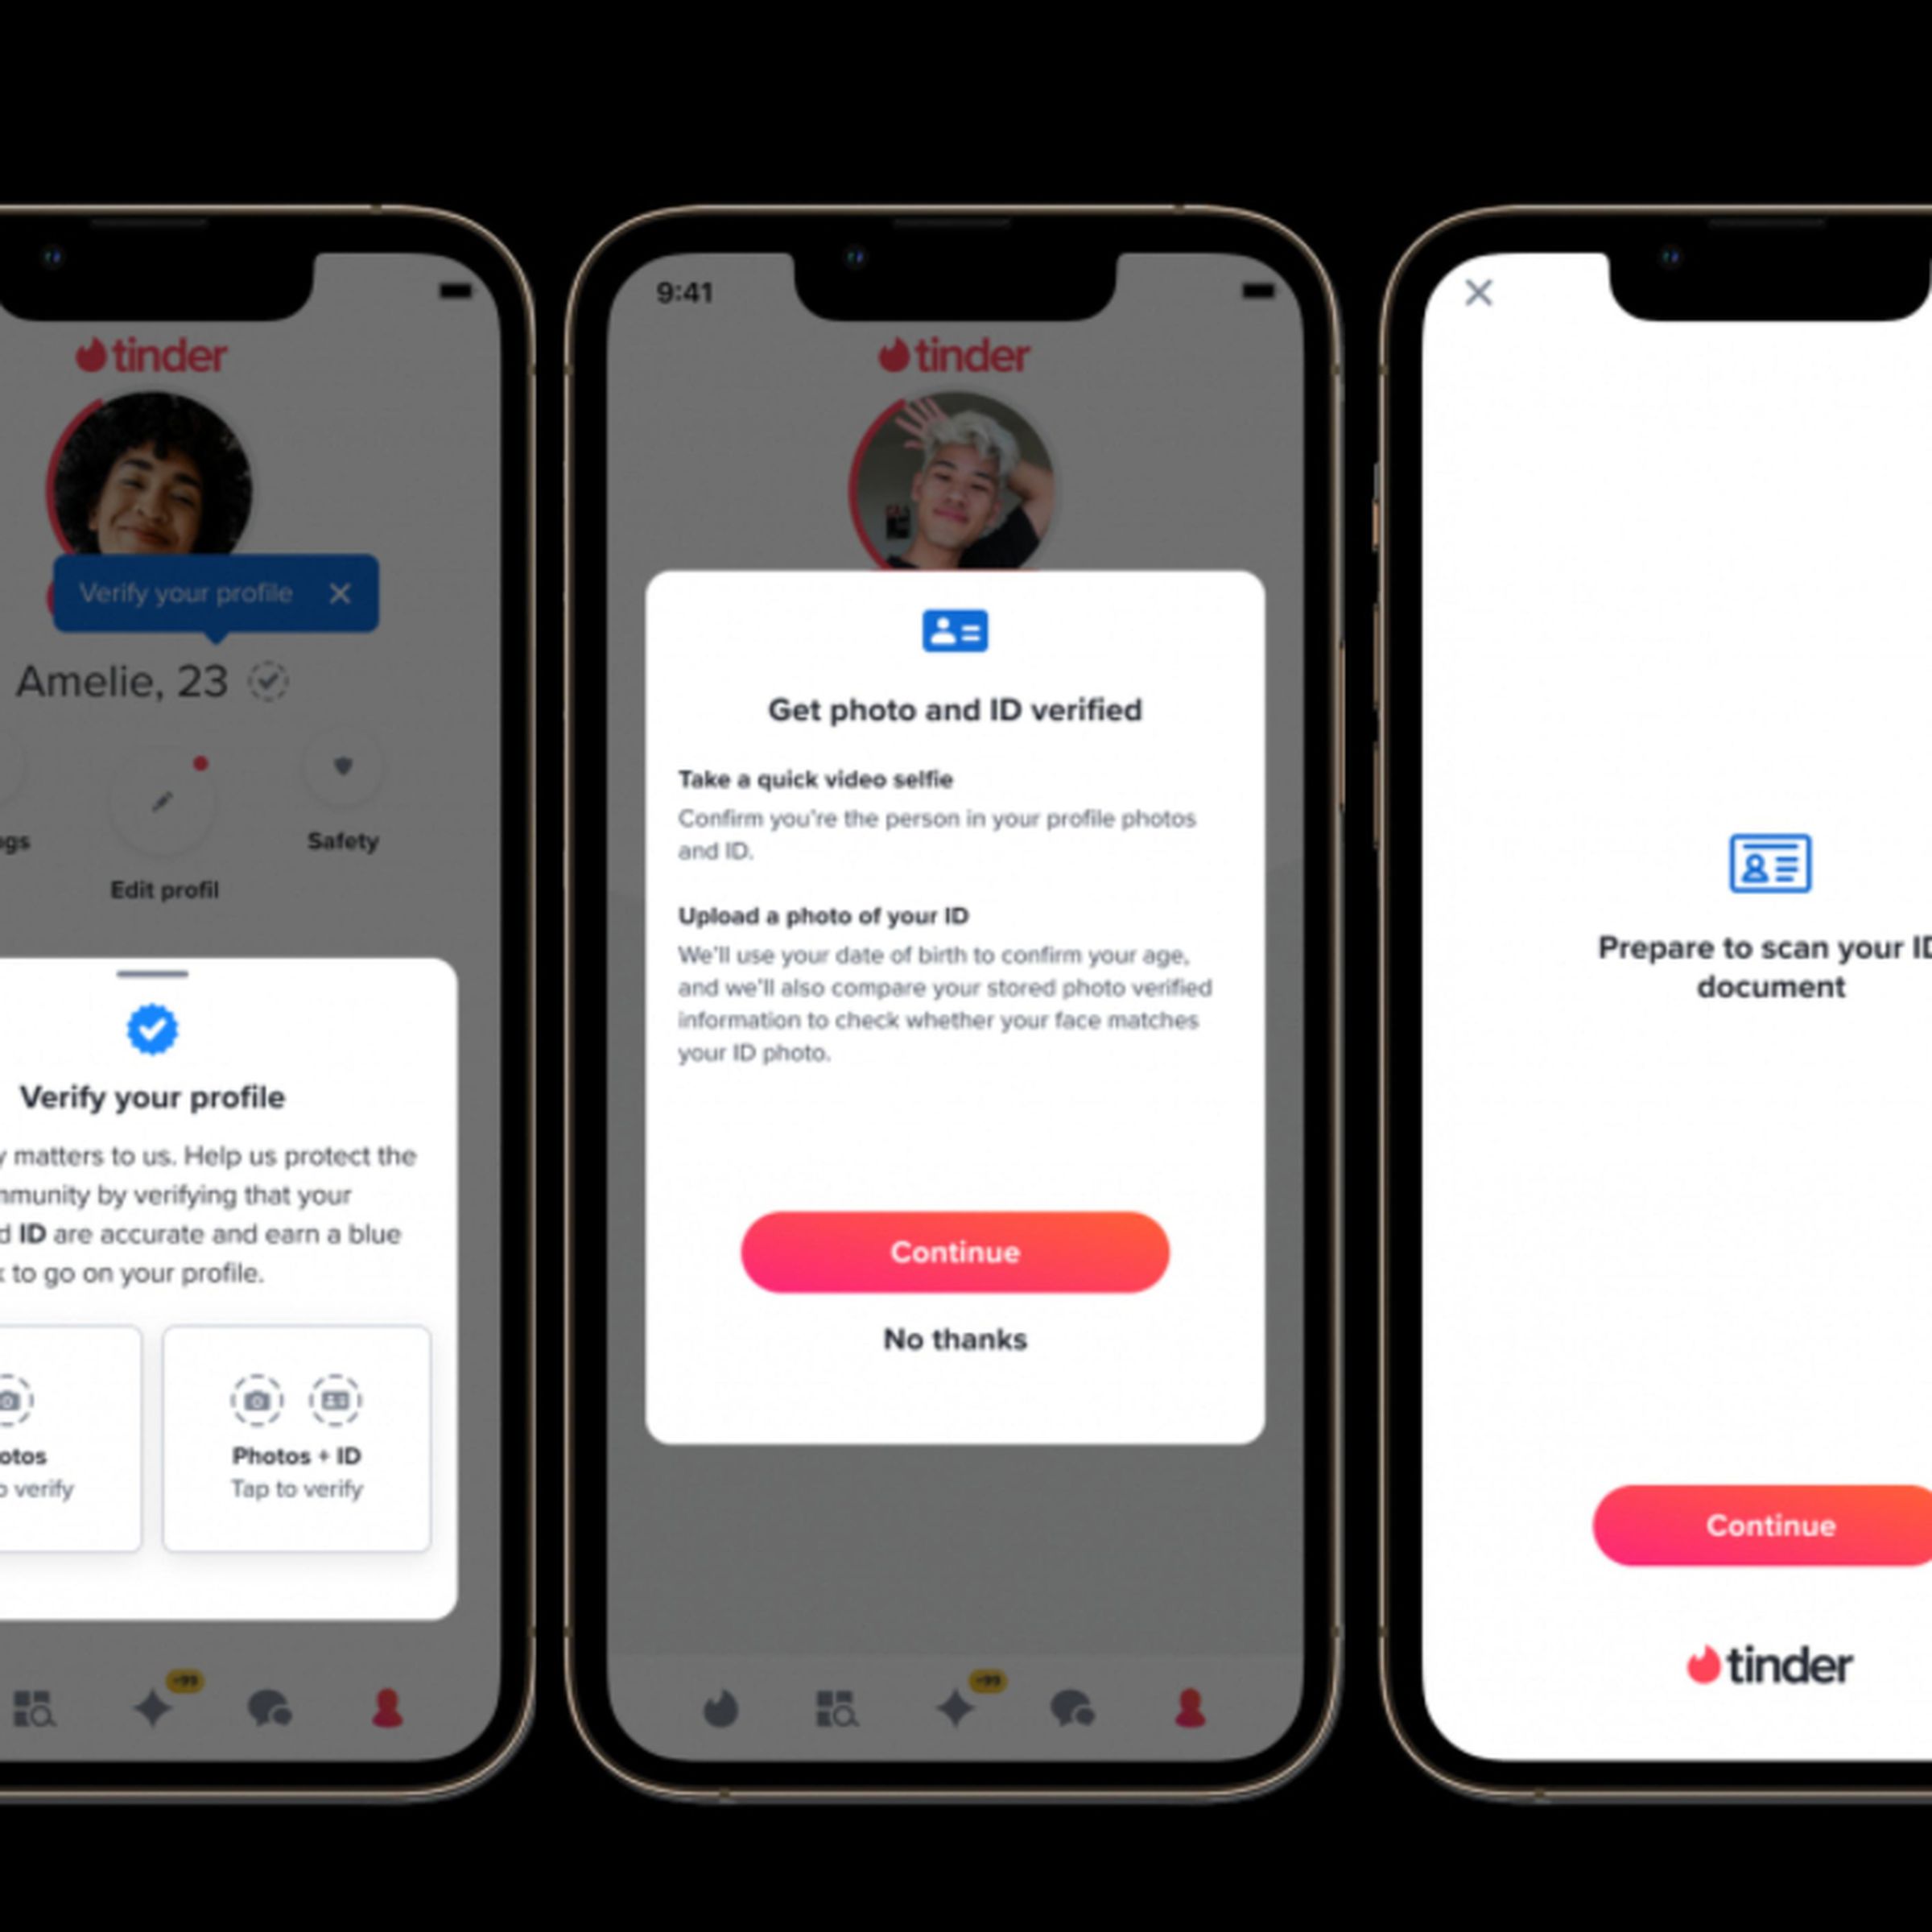 Mobile screenshots showing the process of adding your ID to Tinder